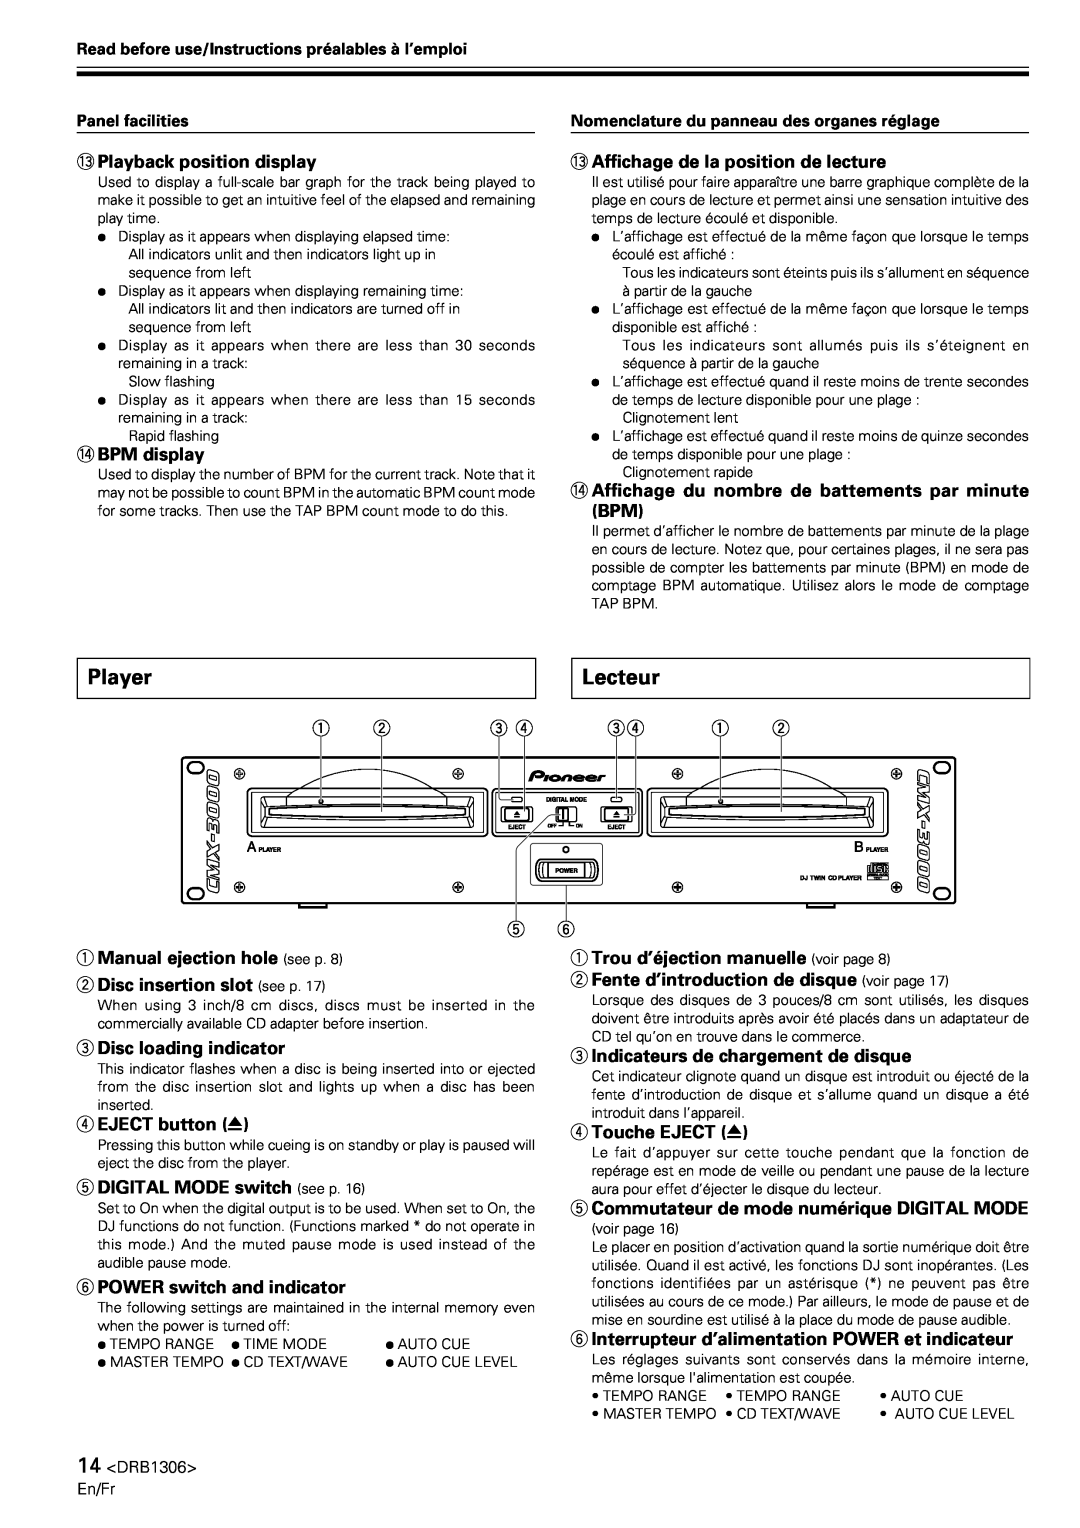 Pioneer CMX-3000 operating instructions Player, Lecteur 